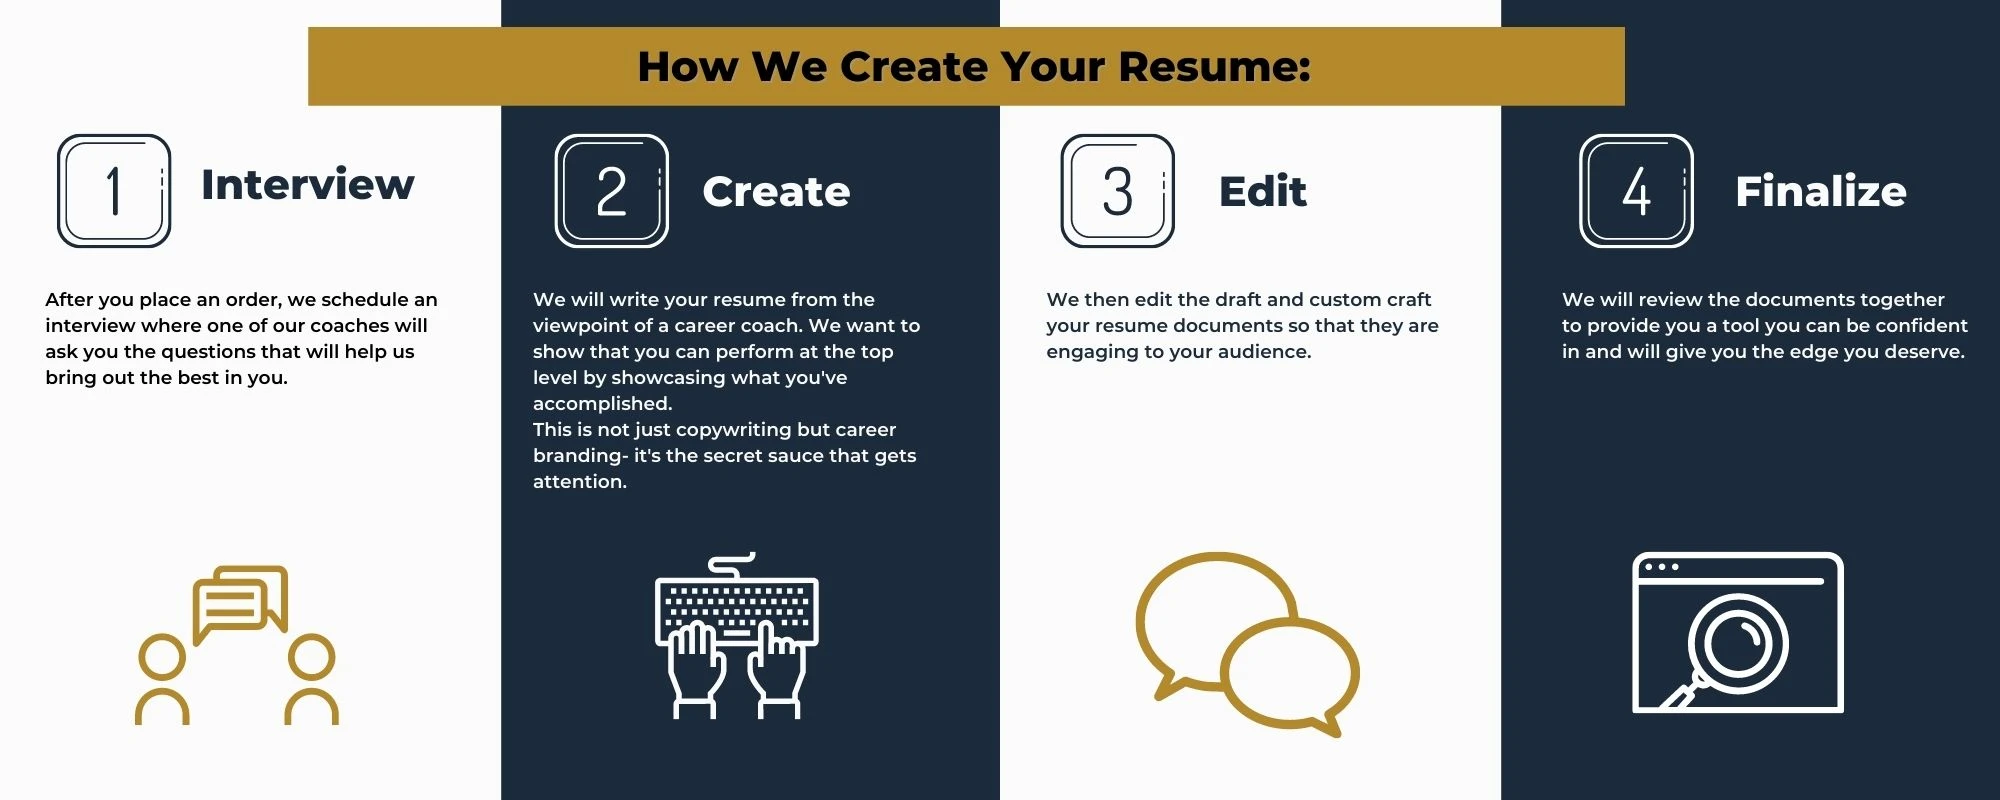 How We Write Your Resume